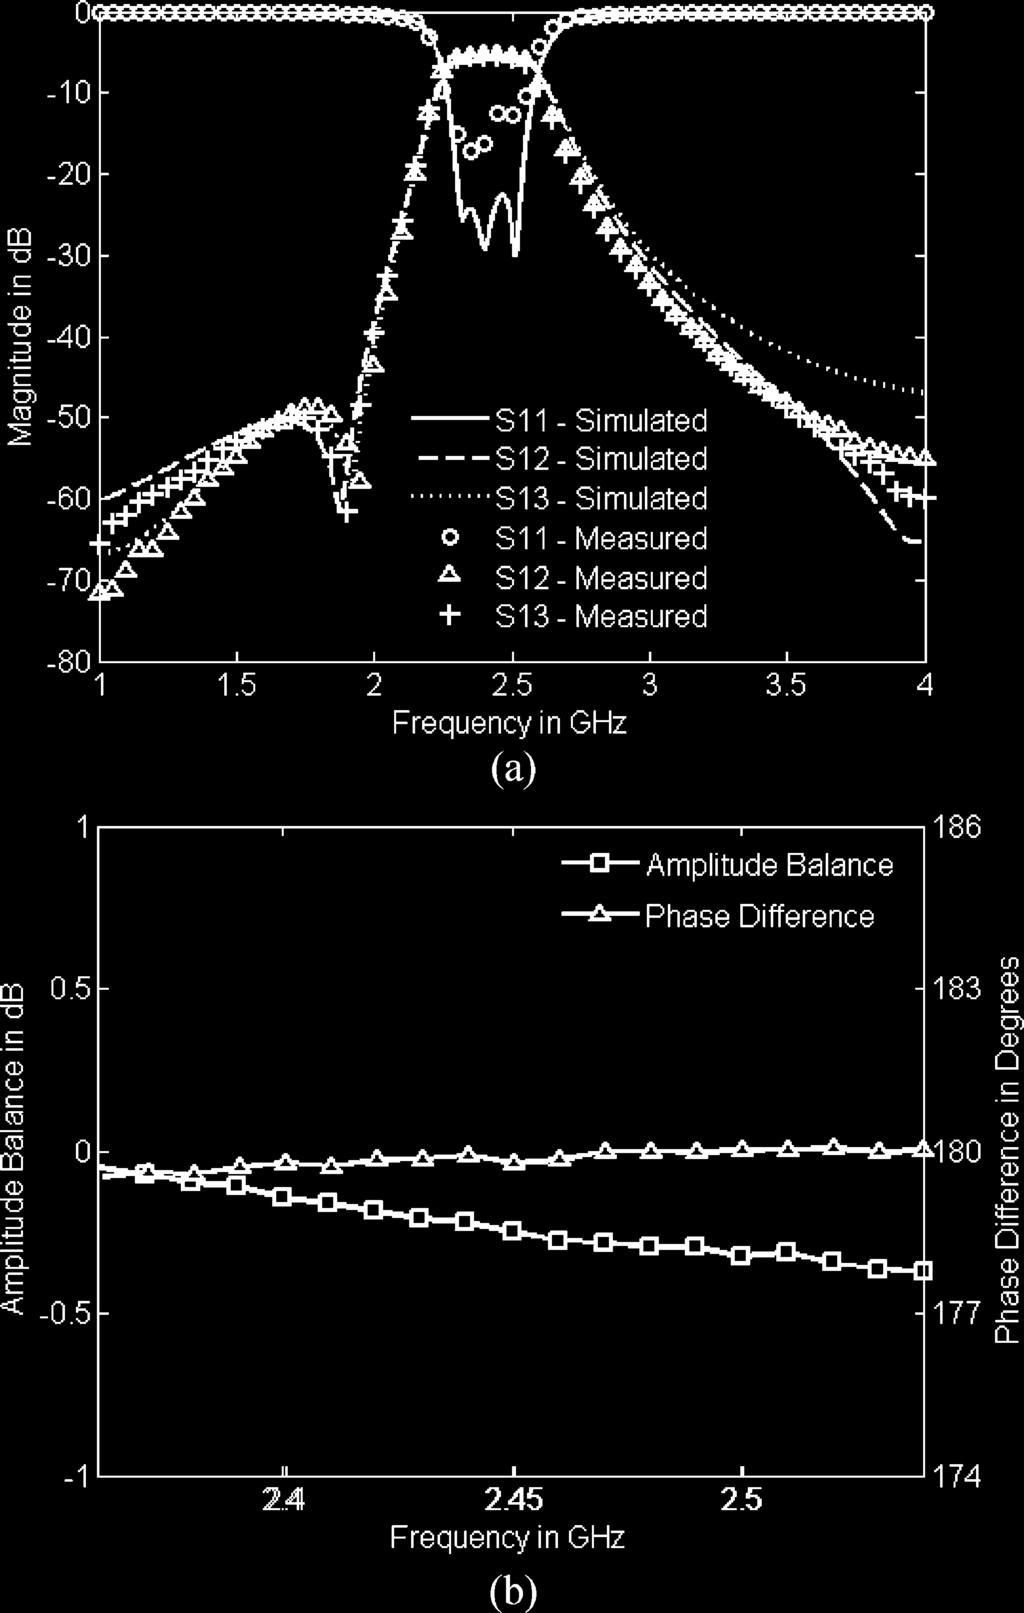 Finally, a maximum of 1 phase imbalance is achieved within the passband. However, there is a noticeable mismatch at the unbalanced port. By adjusting the circuit model shown in Fig.